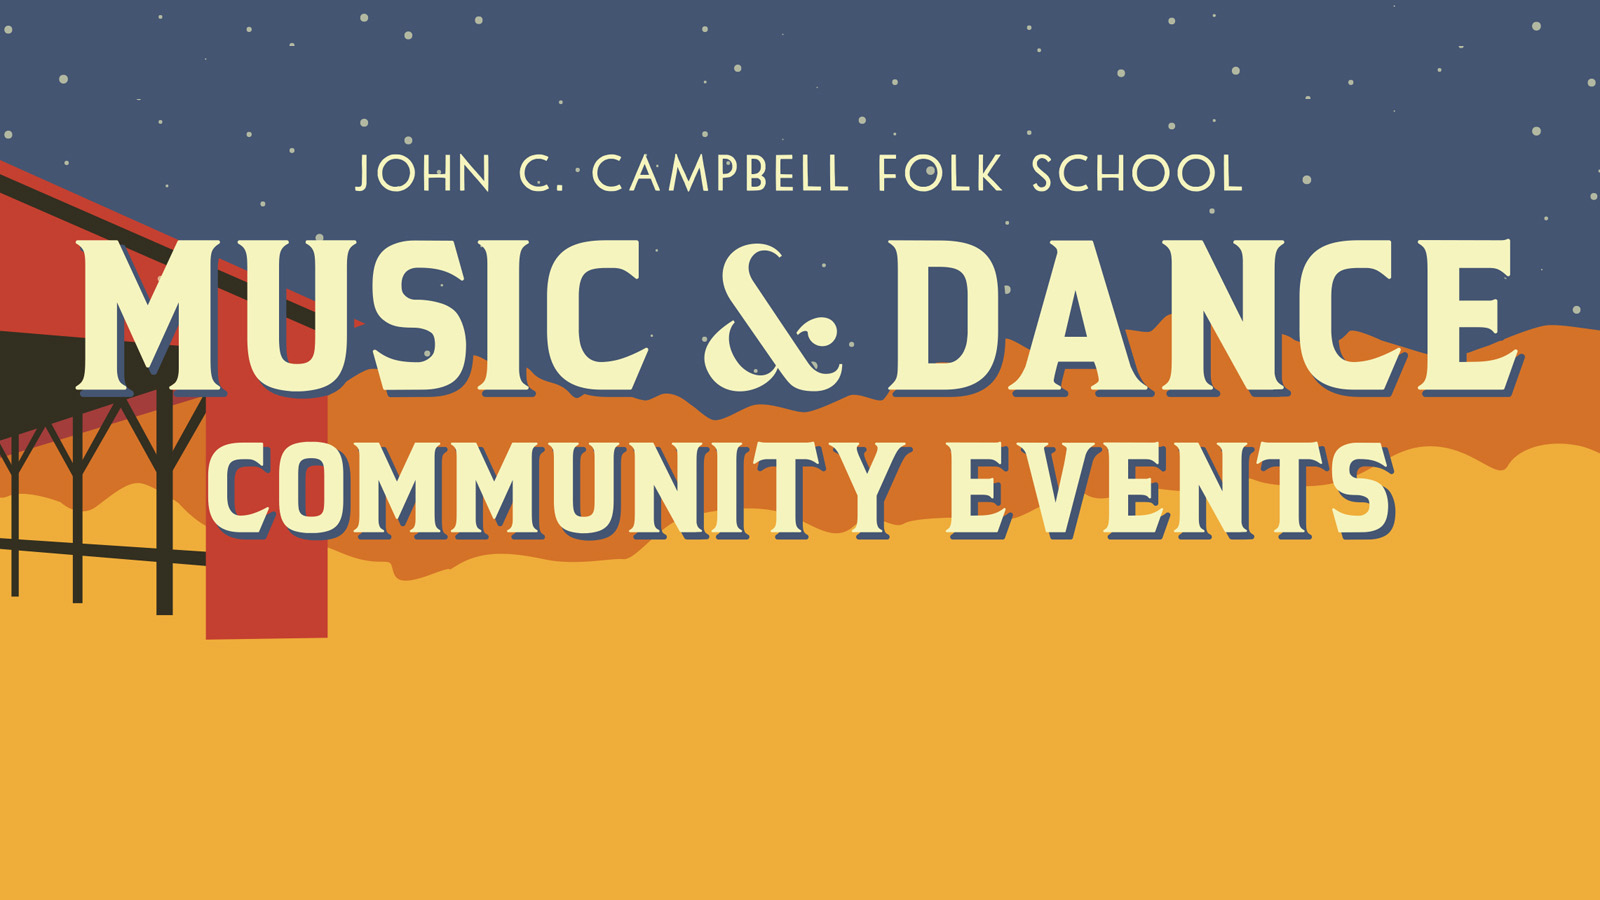 Flyer with text advertising Music and Dance Community Events. A drawing of our Festival Barn fills the left side, and the rest of the image is a gradient representing the sunset.